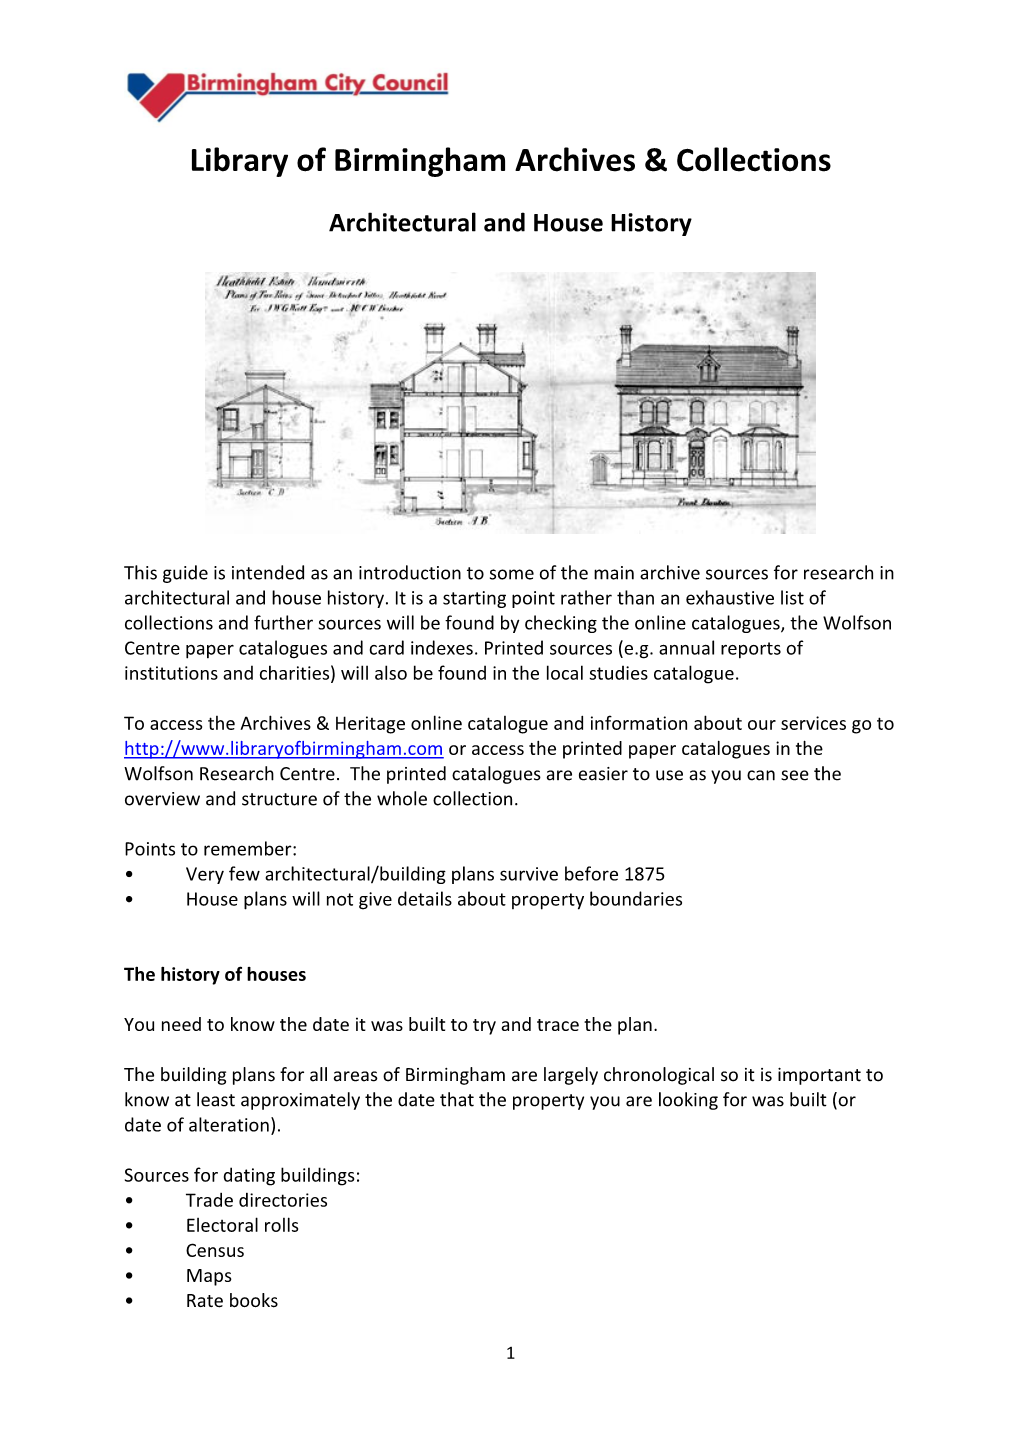 Building Plans and Architechtural History